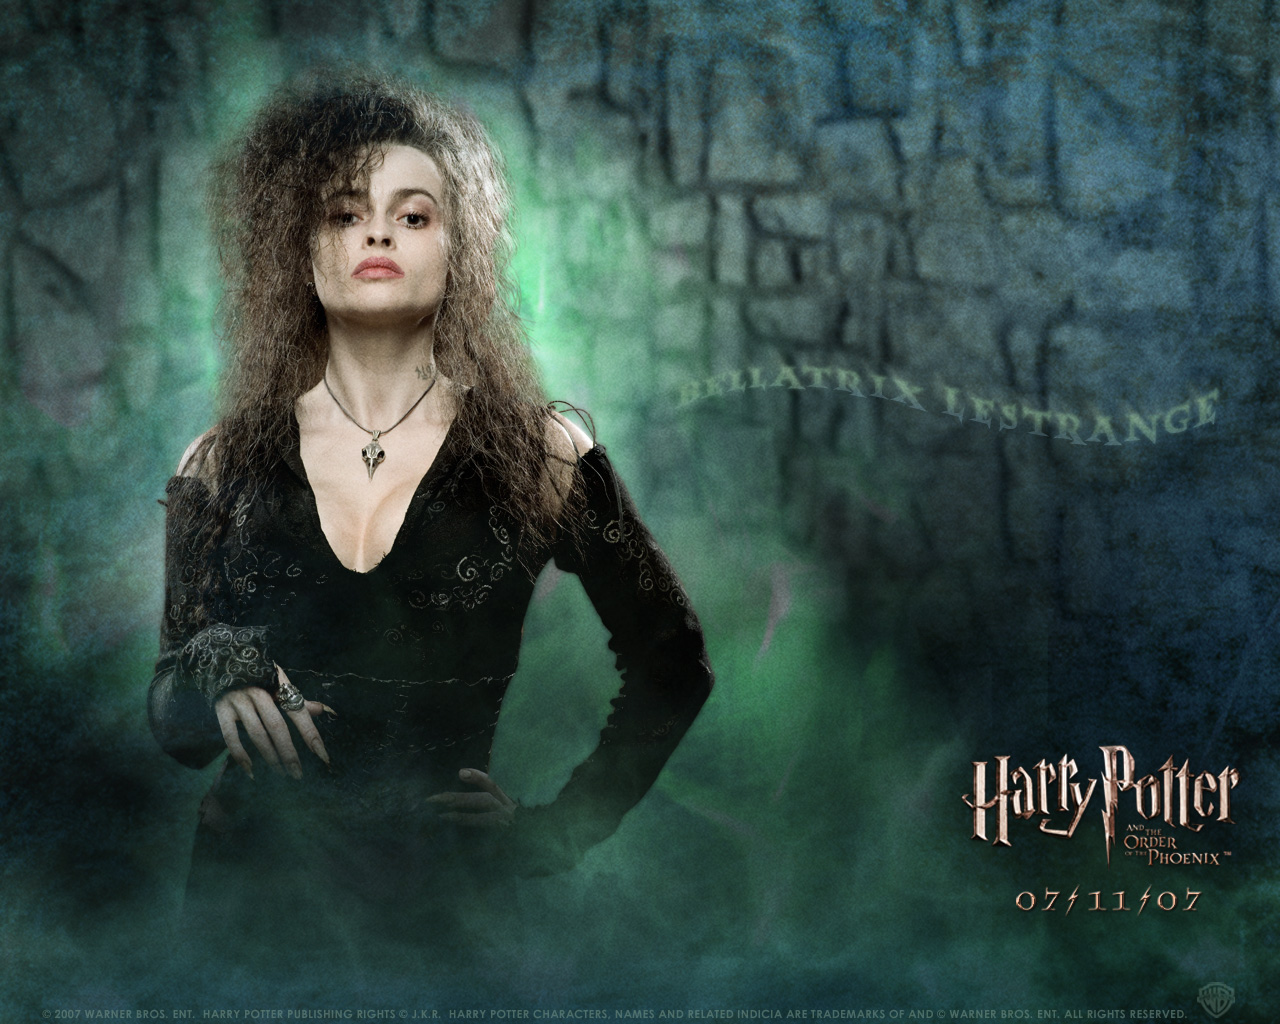 Harry Potter And The Order Of The Phoenix Widescreen image